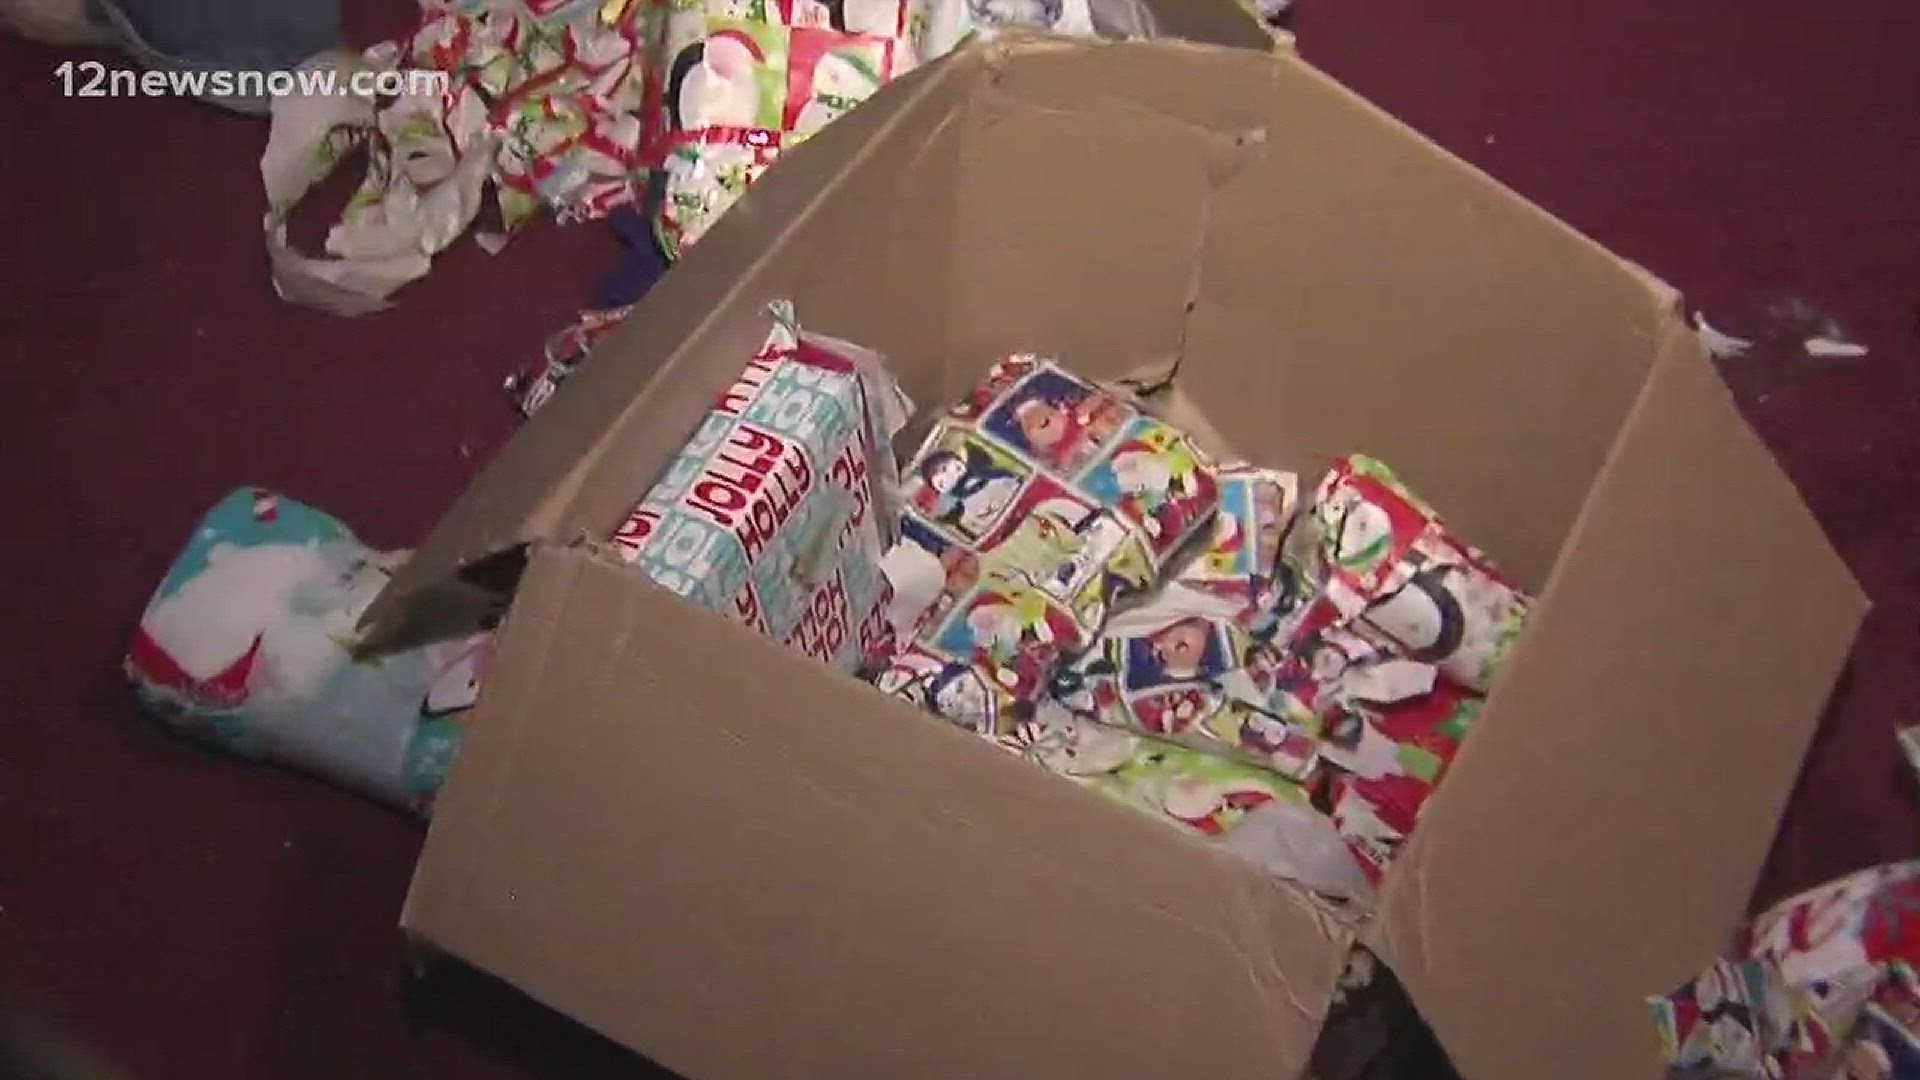 An Orange resident warns about items being stolen from packages during Christmas.